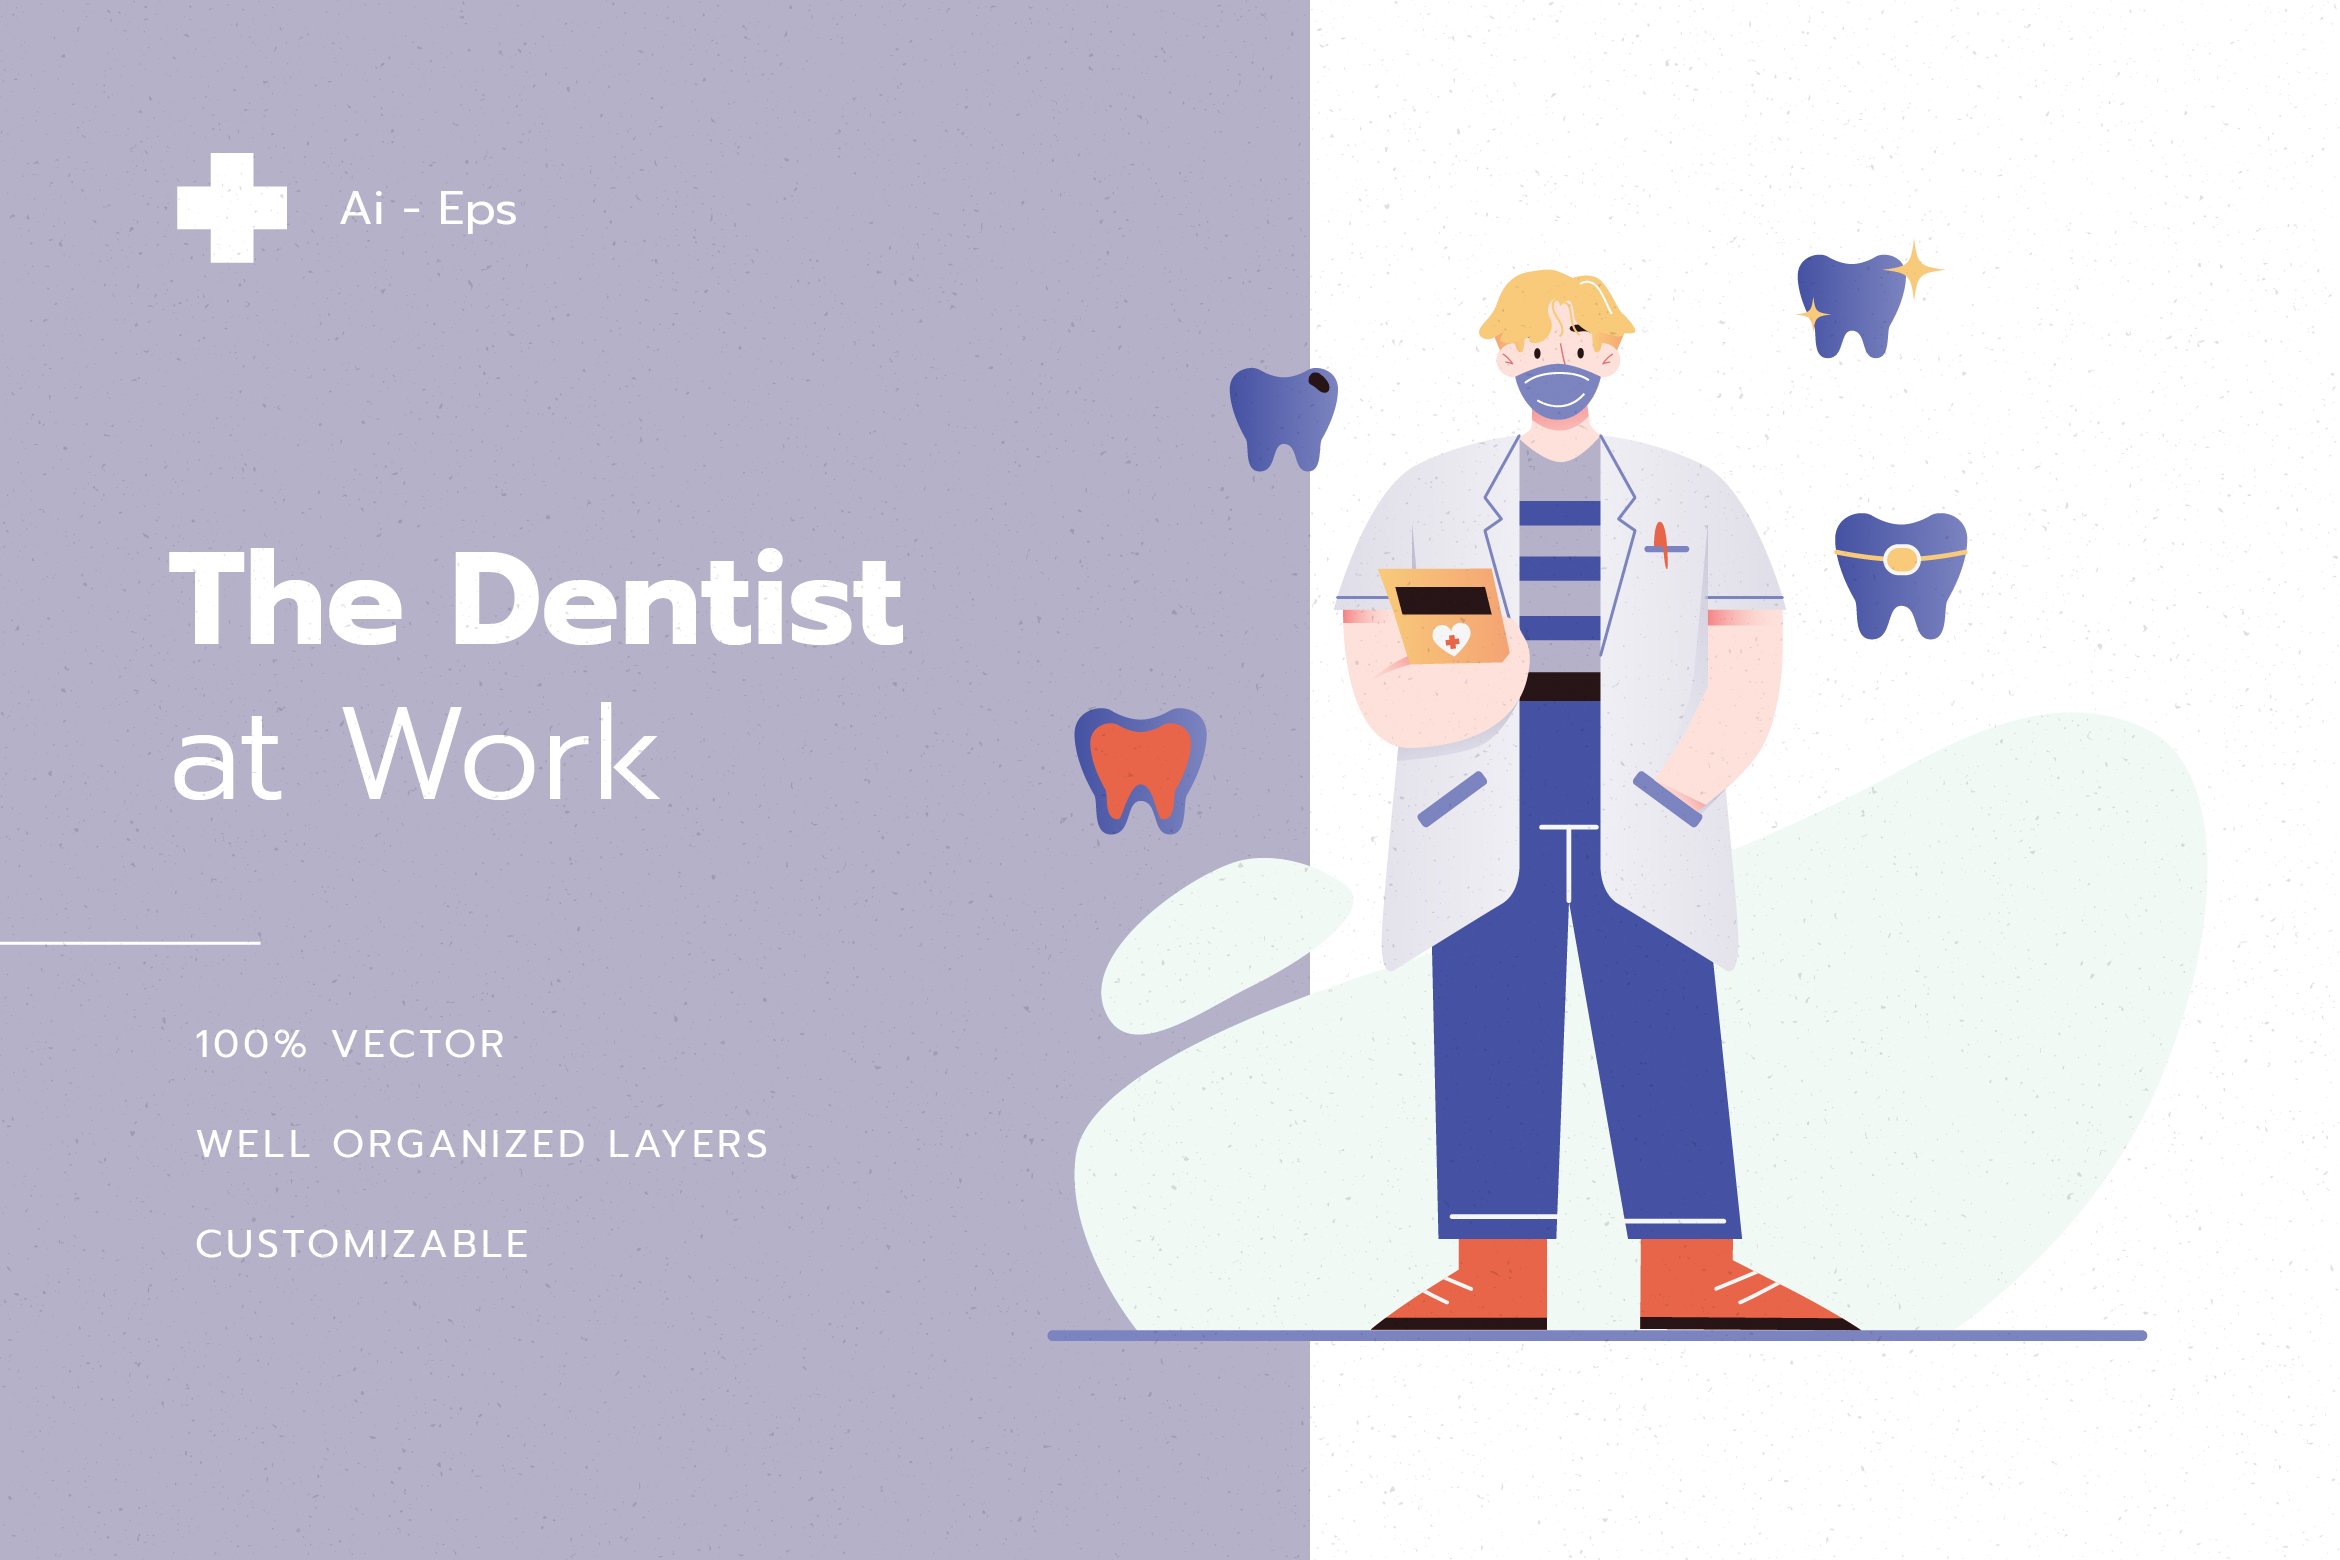 The Dentist at Work Illustration cover image.